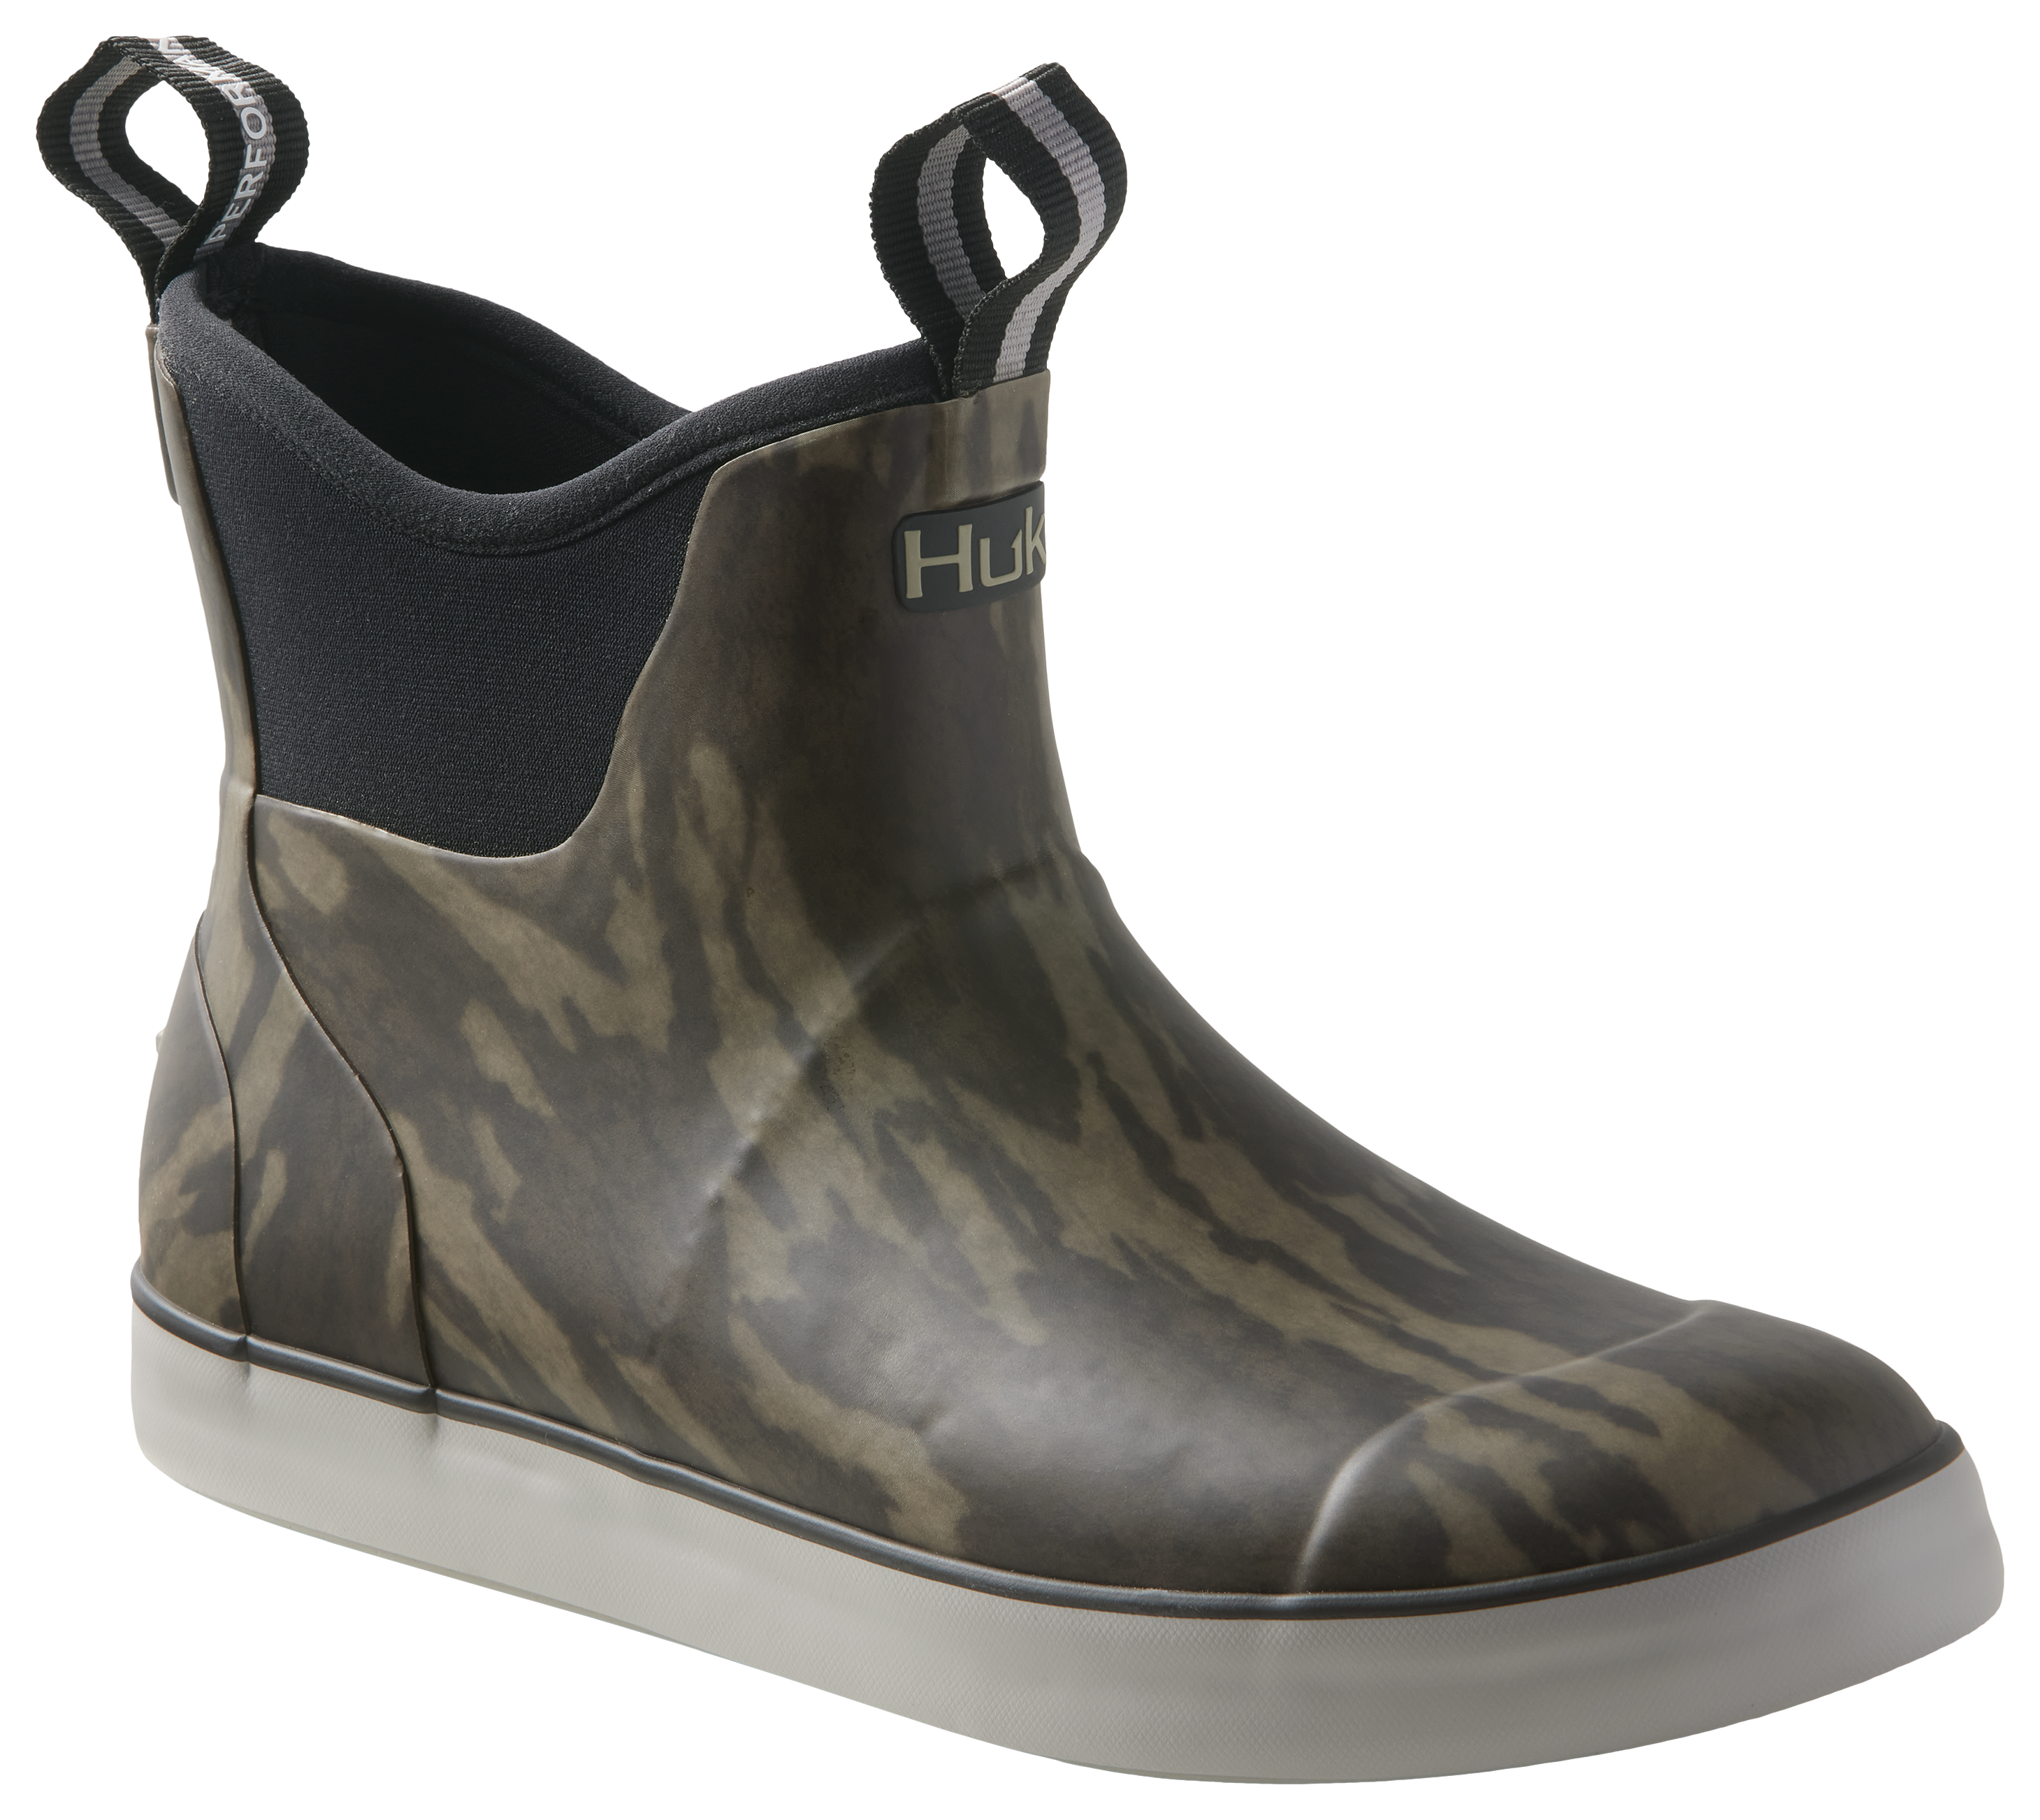 Huk Rogue Wave Deck Boots for Men - Mossy Oak Bottomland - 13M